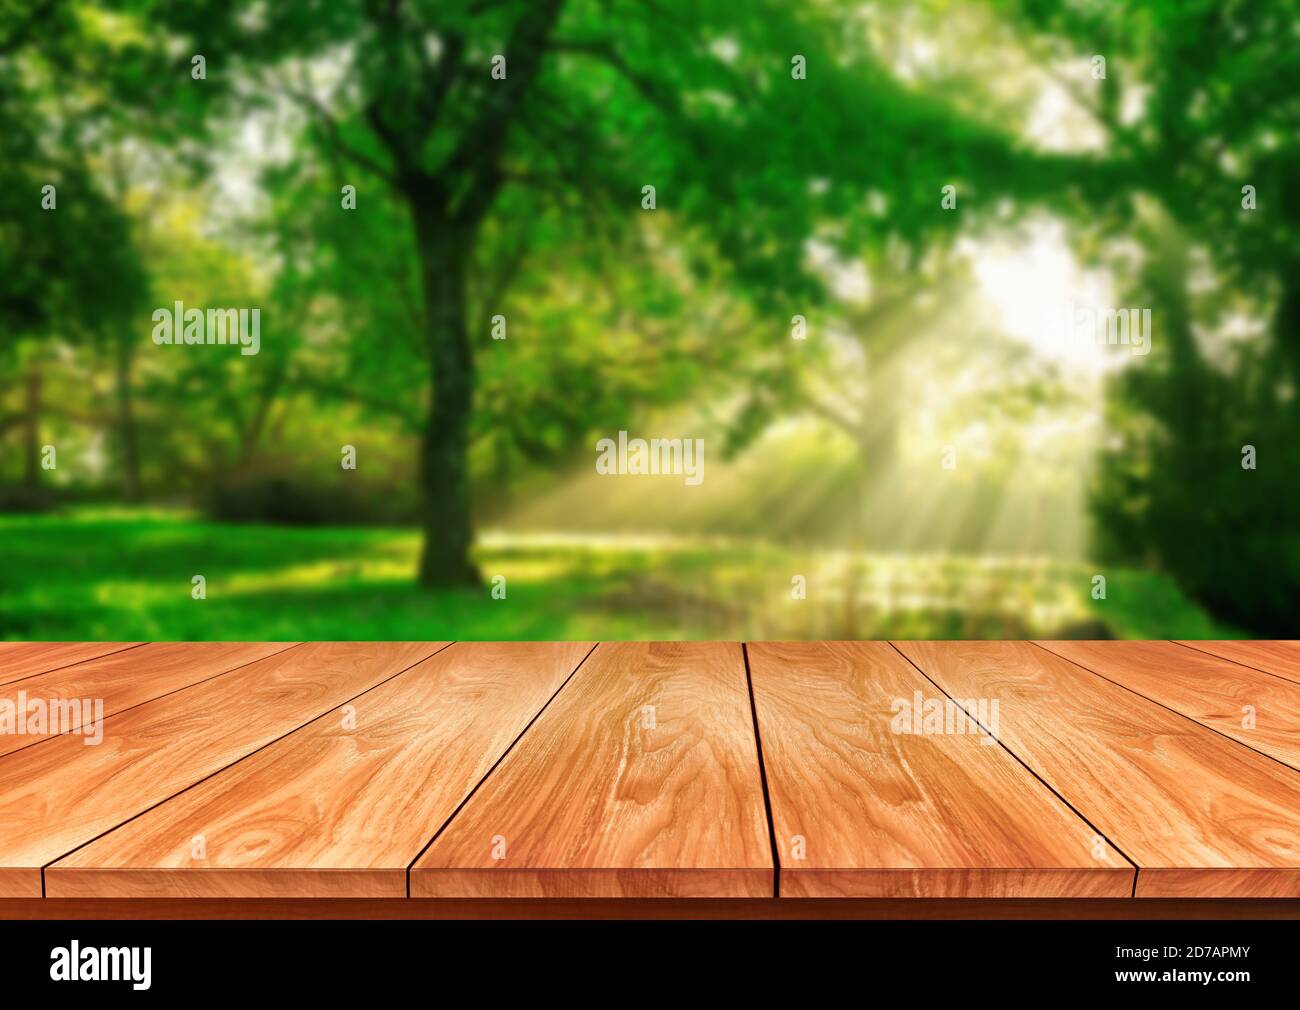 Brown wood table in green blur nature background of trees and grass in the  park with empty copy space on the table for product display mockup. Fresh  Stock Photo - Alamy